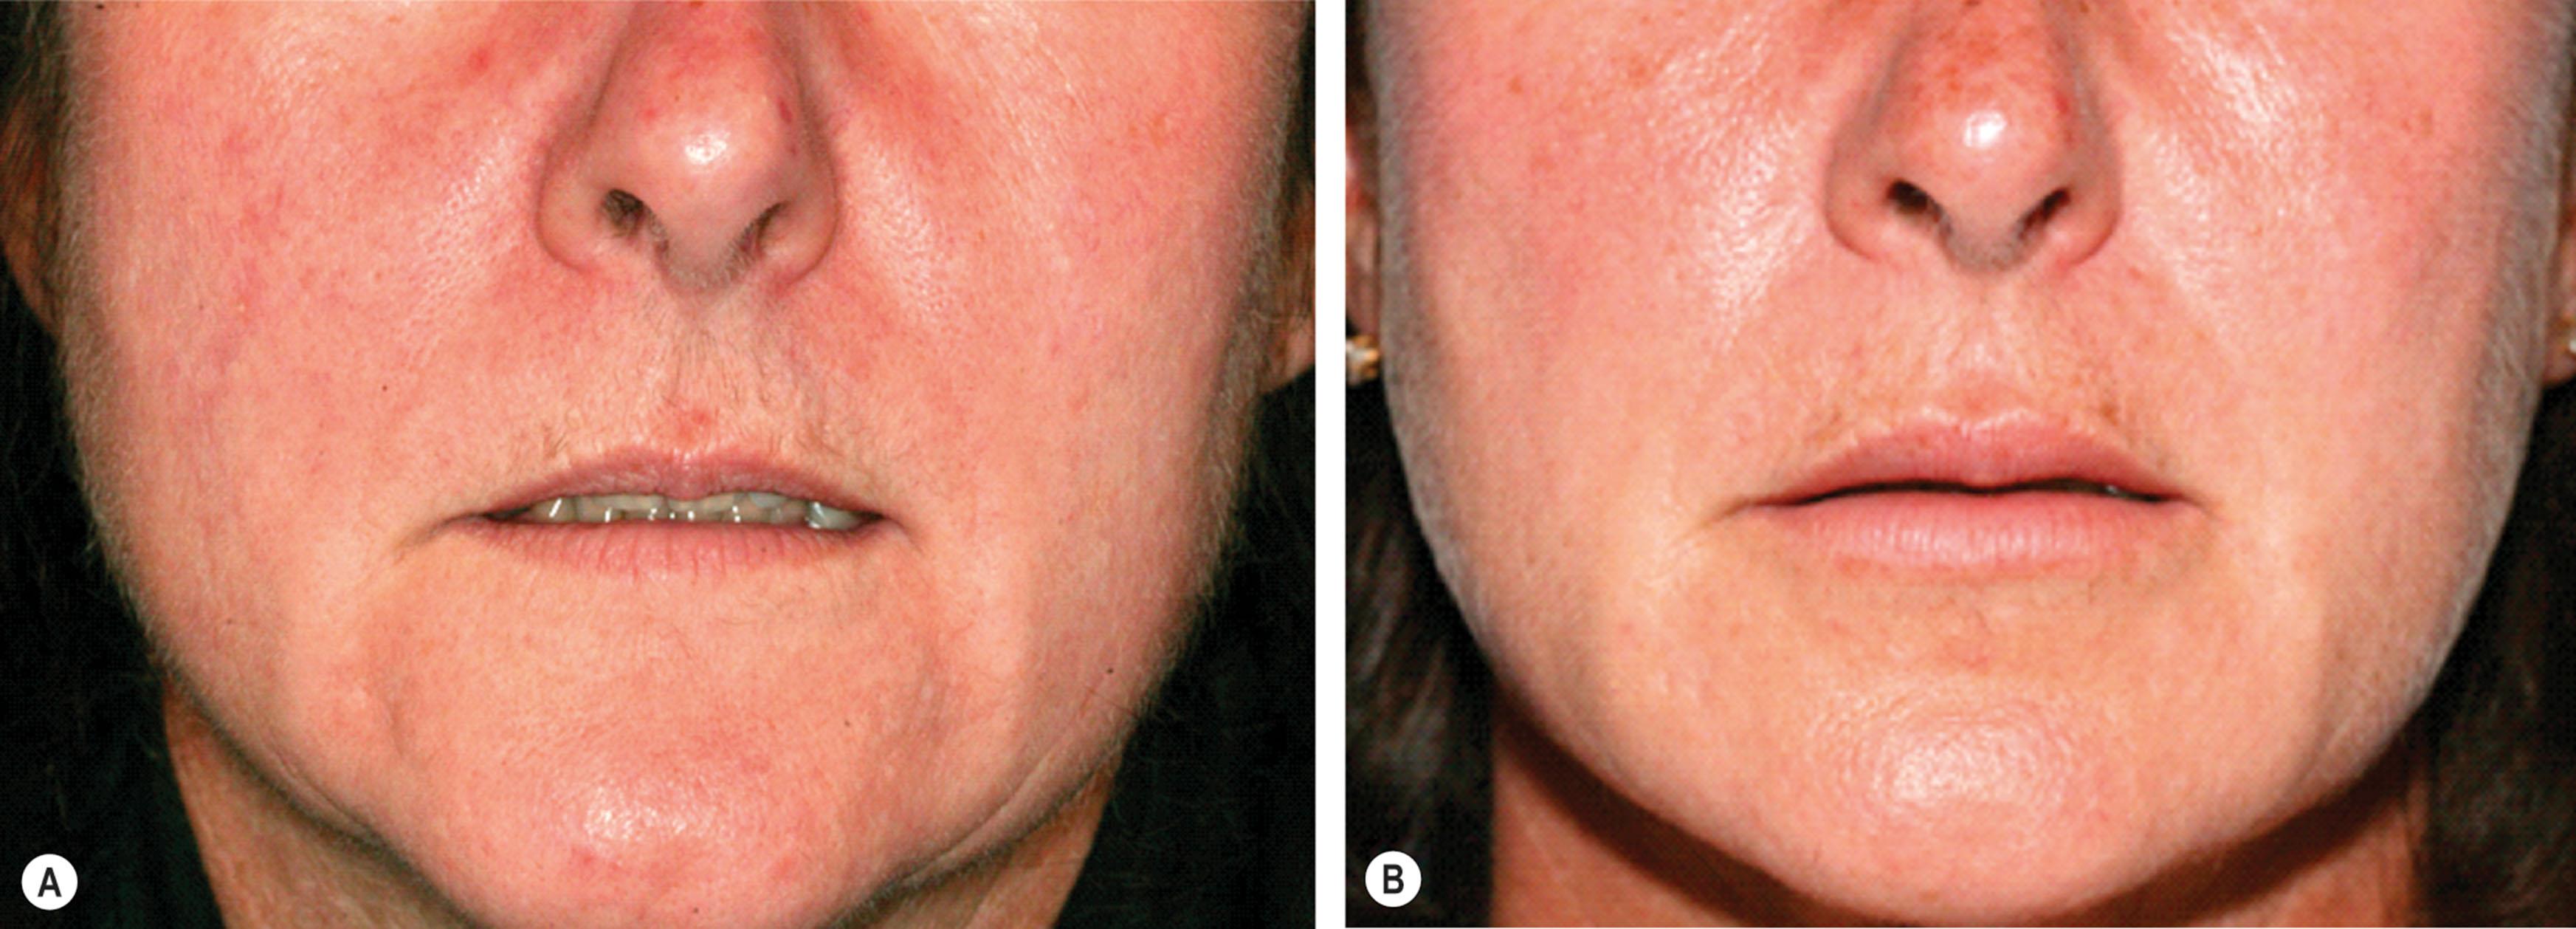 Figure 16.4, This 50-year-old woman had fat grafting to her upper and lower lips in three stages to minimize the postoperative swelling. (A) The patient before and (B) 15 months after her last fat grafting procedure.